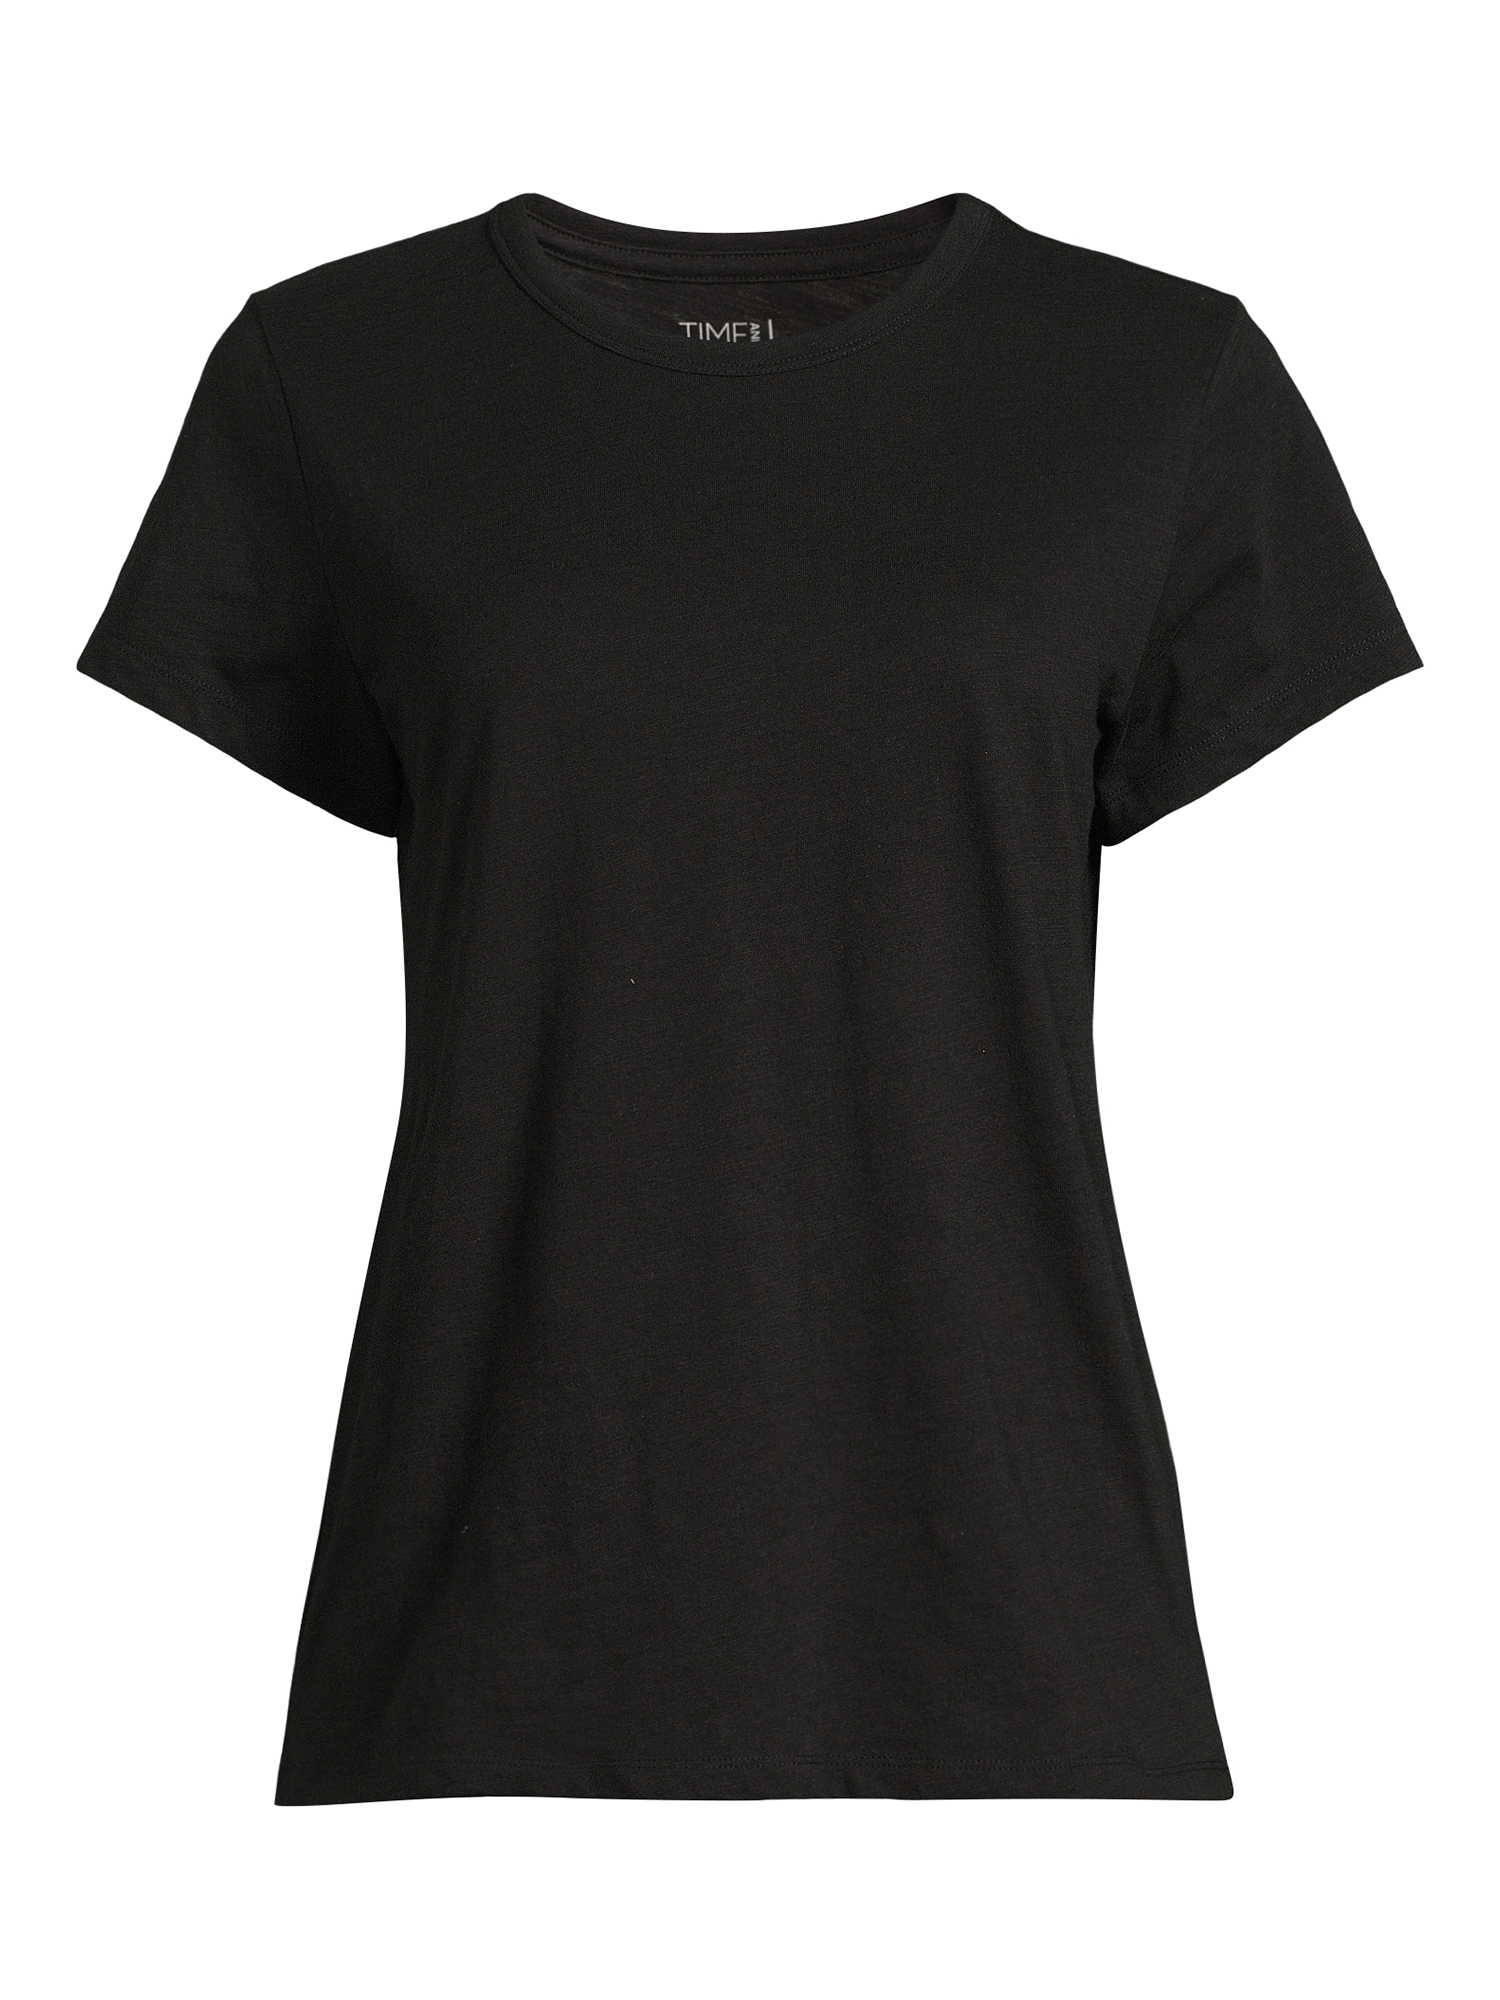 Time and Tru Women's Slub Texture Tee with Short Sleeves, Sizes S-XXXL - image 4 of 6